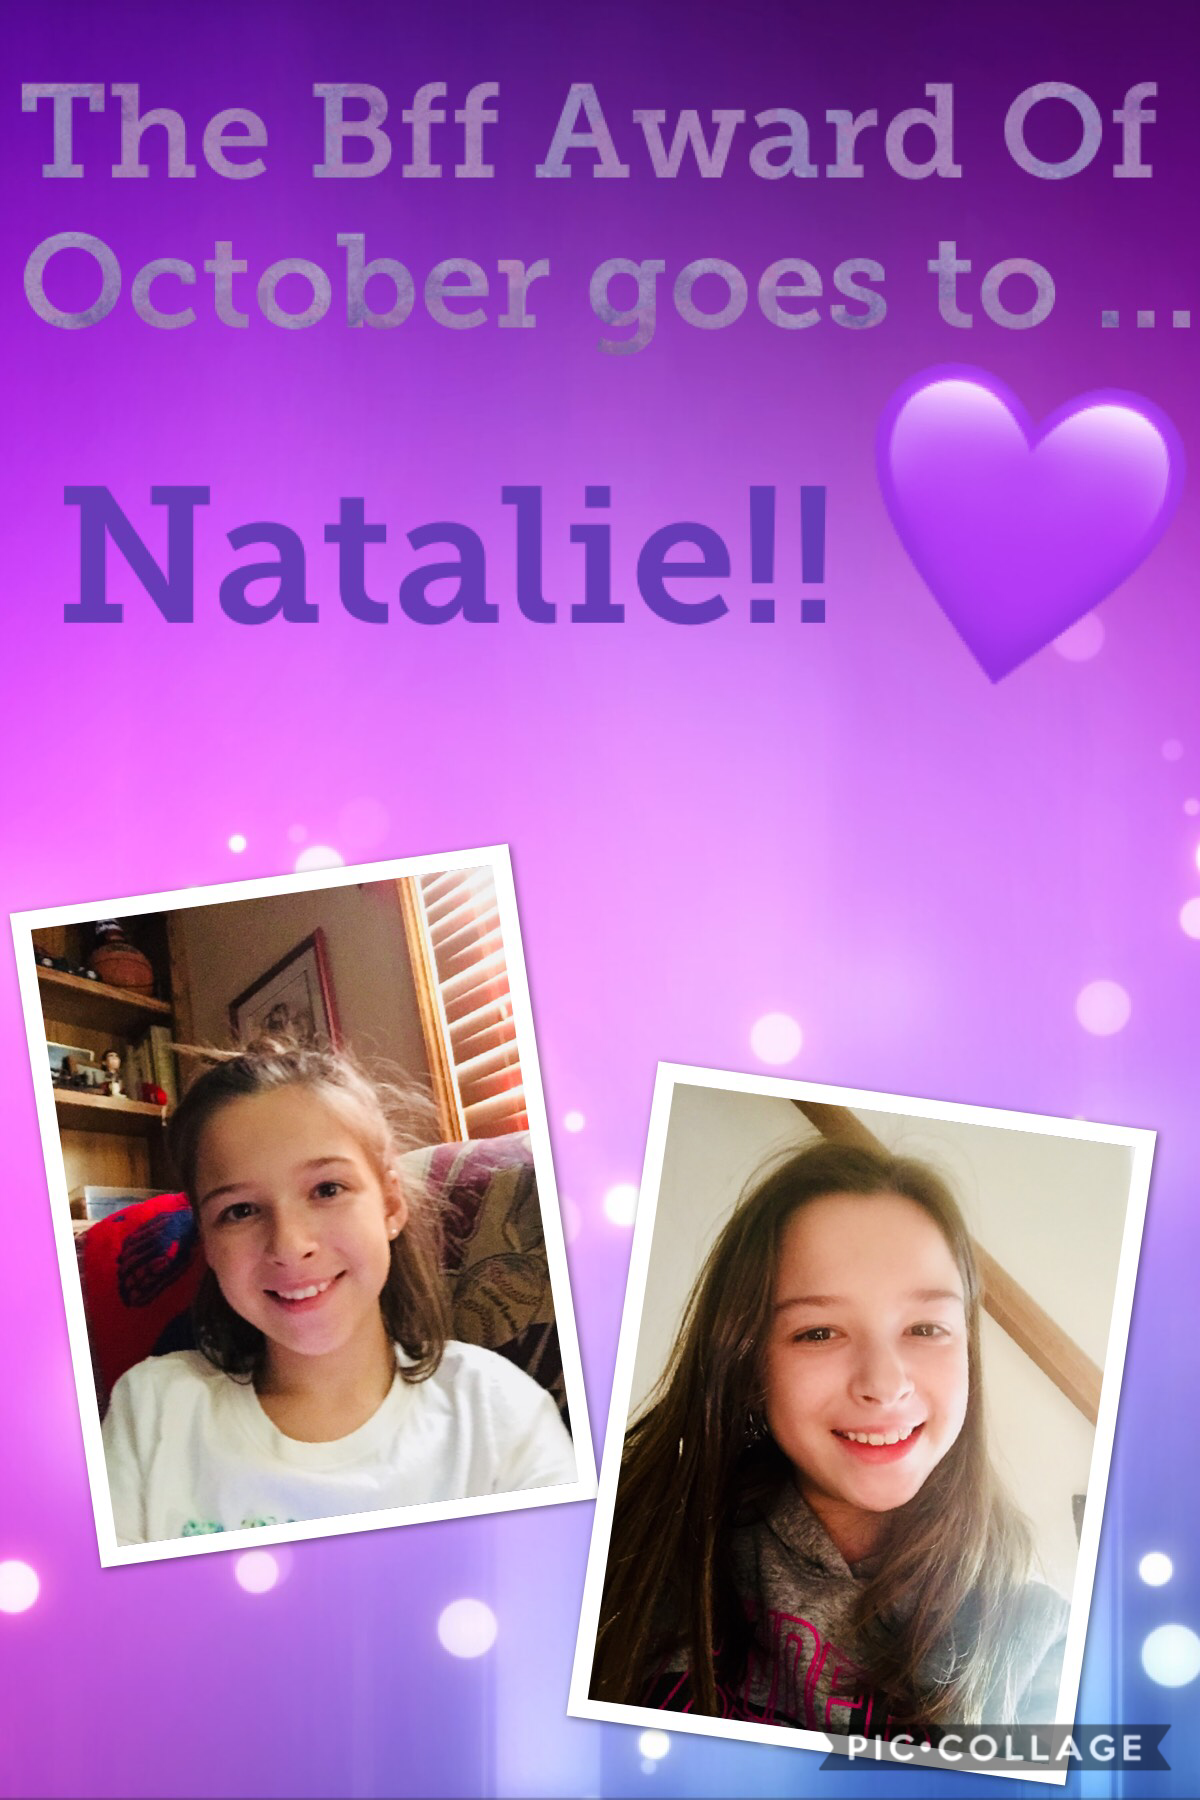 💜Tap💜
I will Have the bff award 🥇 every month ! This month’s is ... Natalie !!